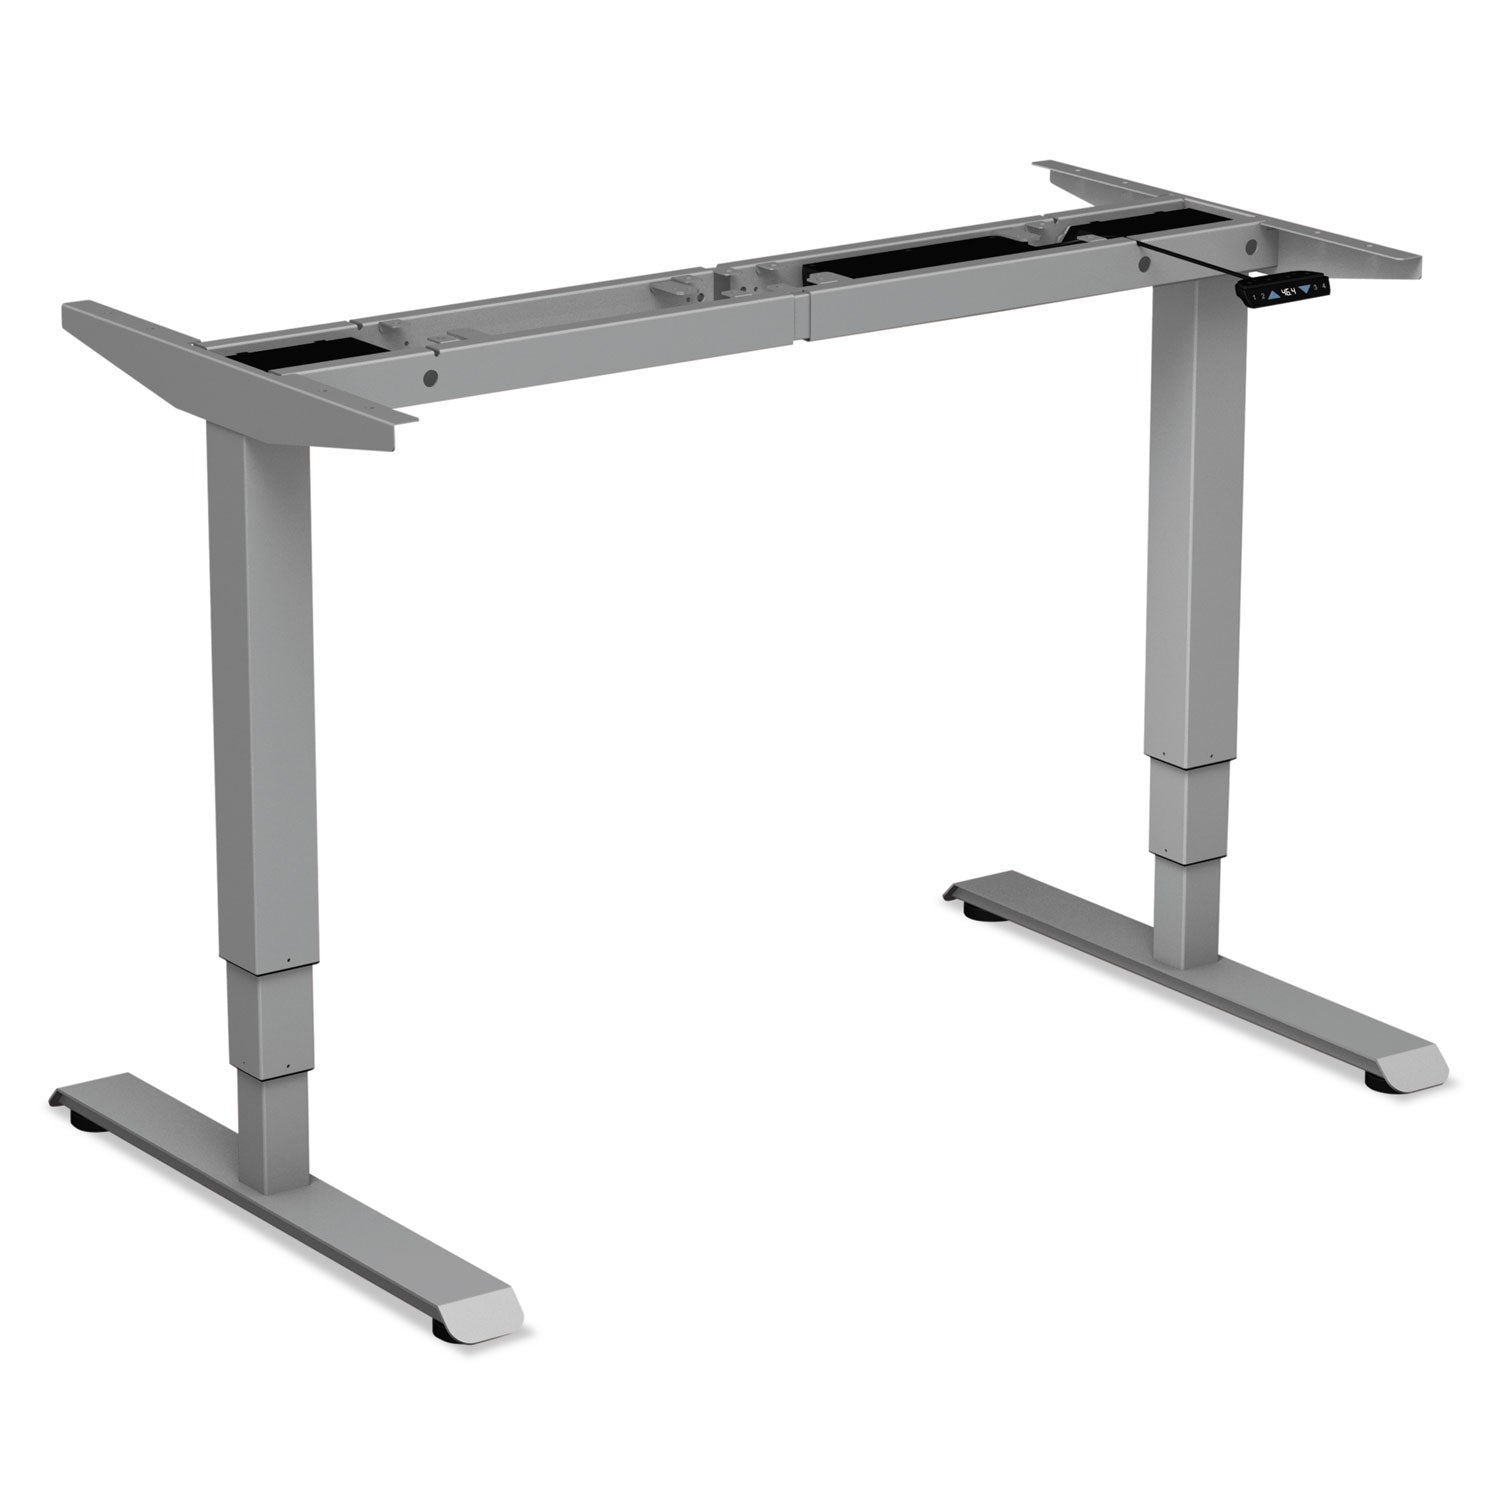 adaptivergo-sit-stand-3-stage-electric-height-adjustable-table-base-with-memory-control-4806-x-2435-x-25-to-507-gray_aleht3sag - 1